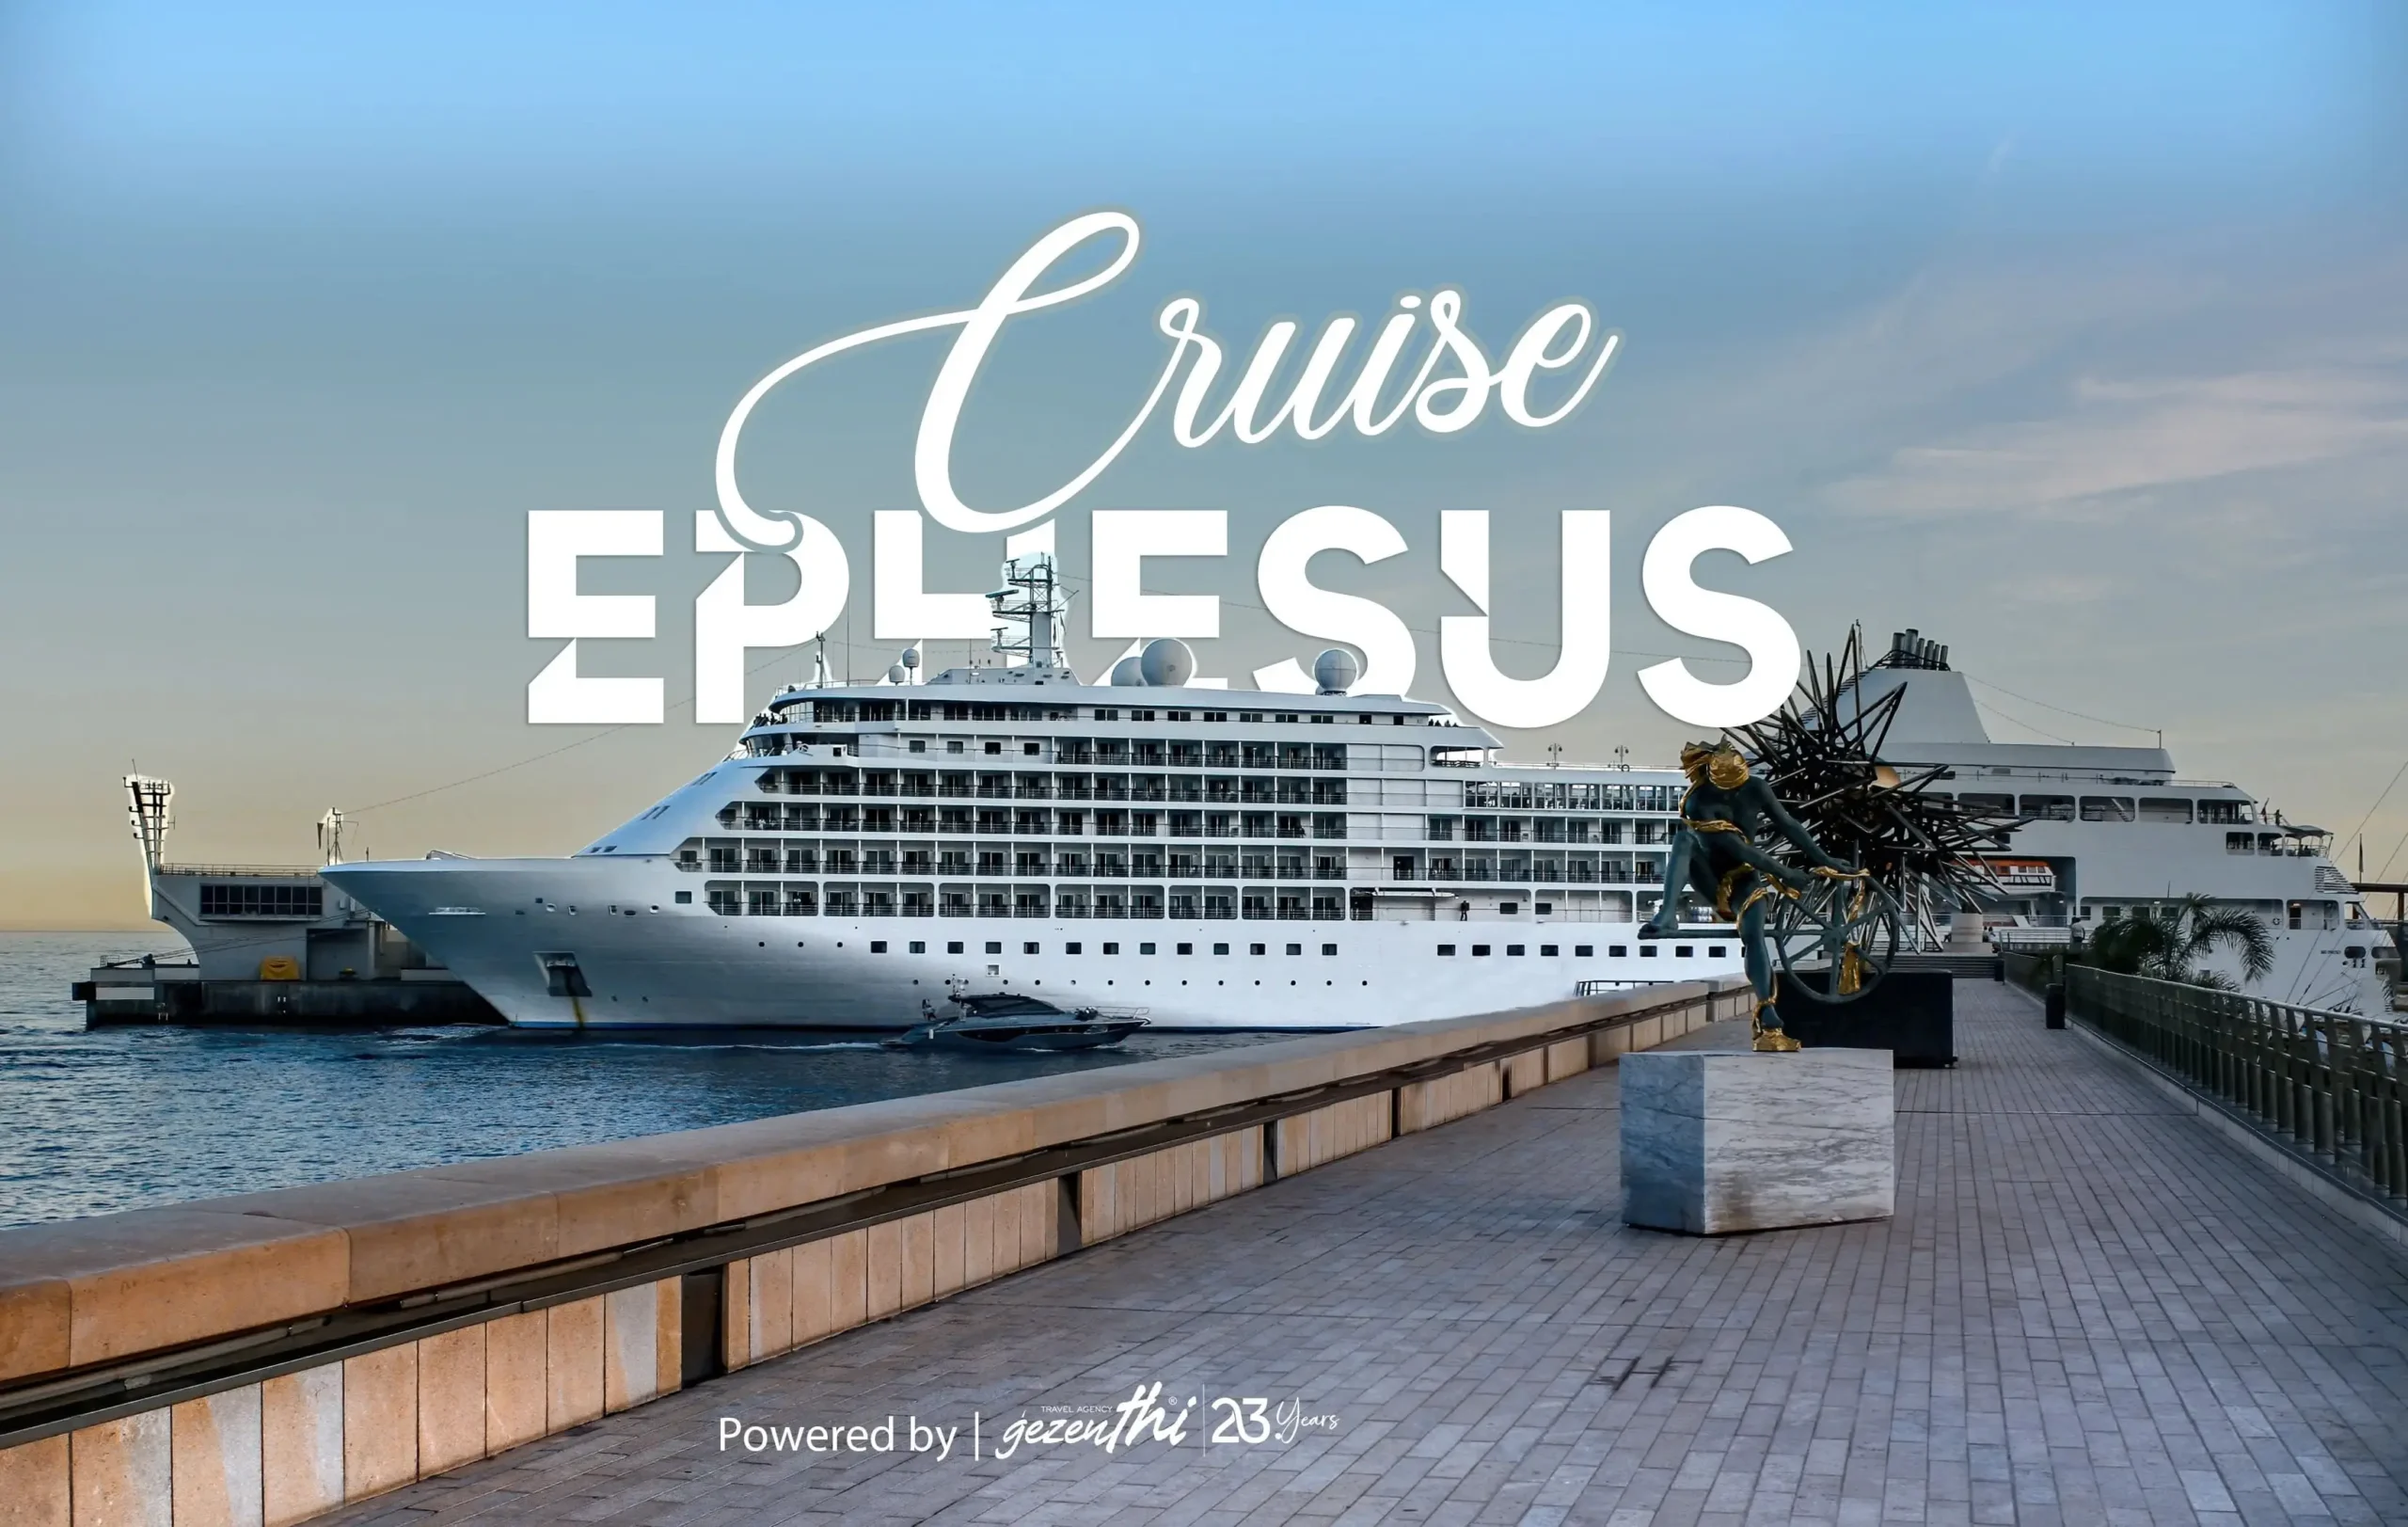 Custom Private Ephesus Tour for Only Cruise Passengers